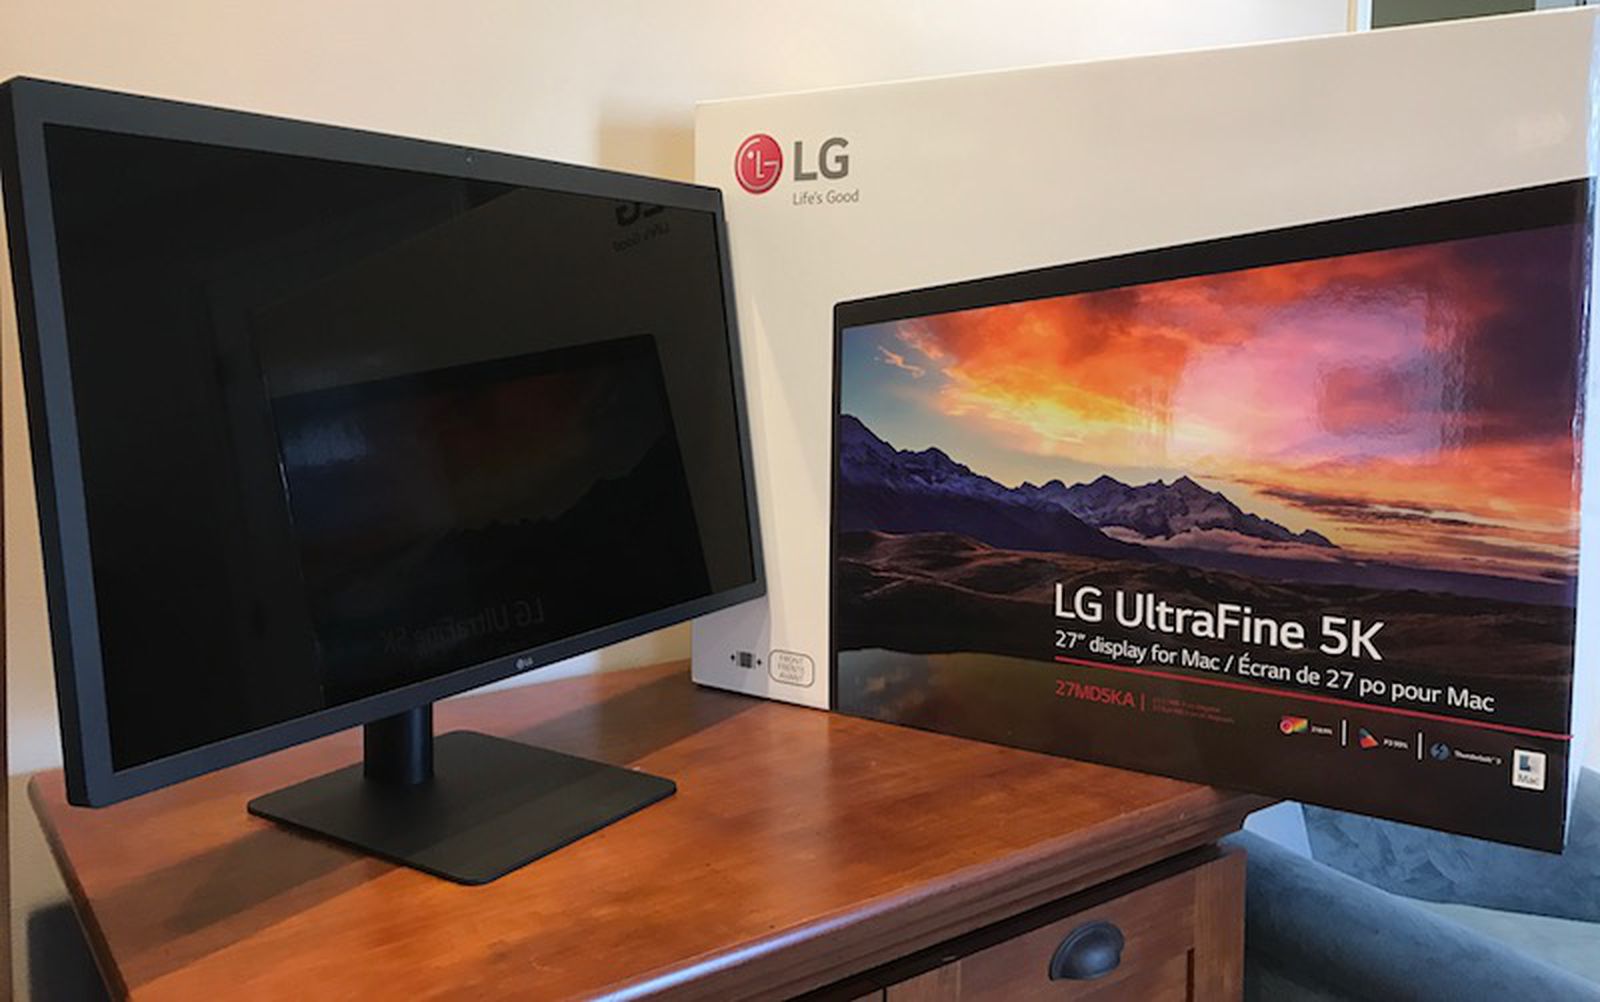 emotional Shipwreck Season LG's UltraFine 5K Display Is a Worthy Companion to the New MacBook Pro,  Even Without Apple's Looks - MacRumors